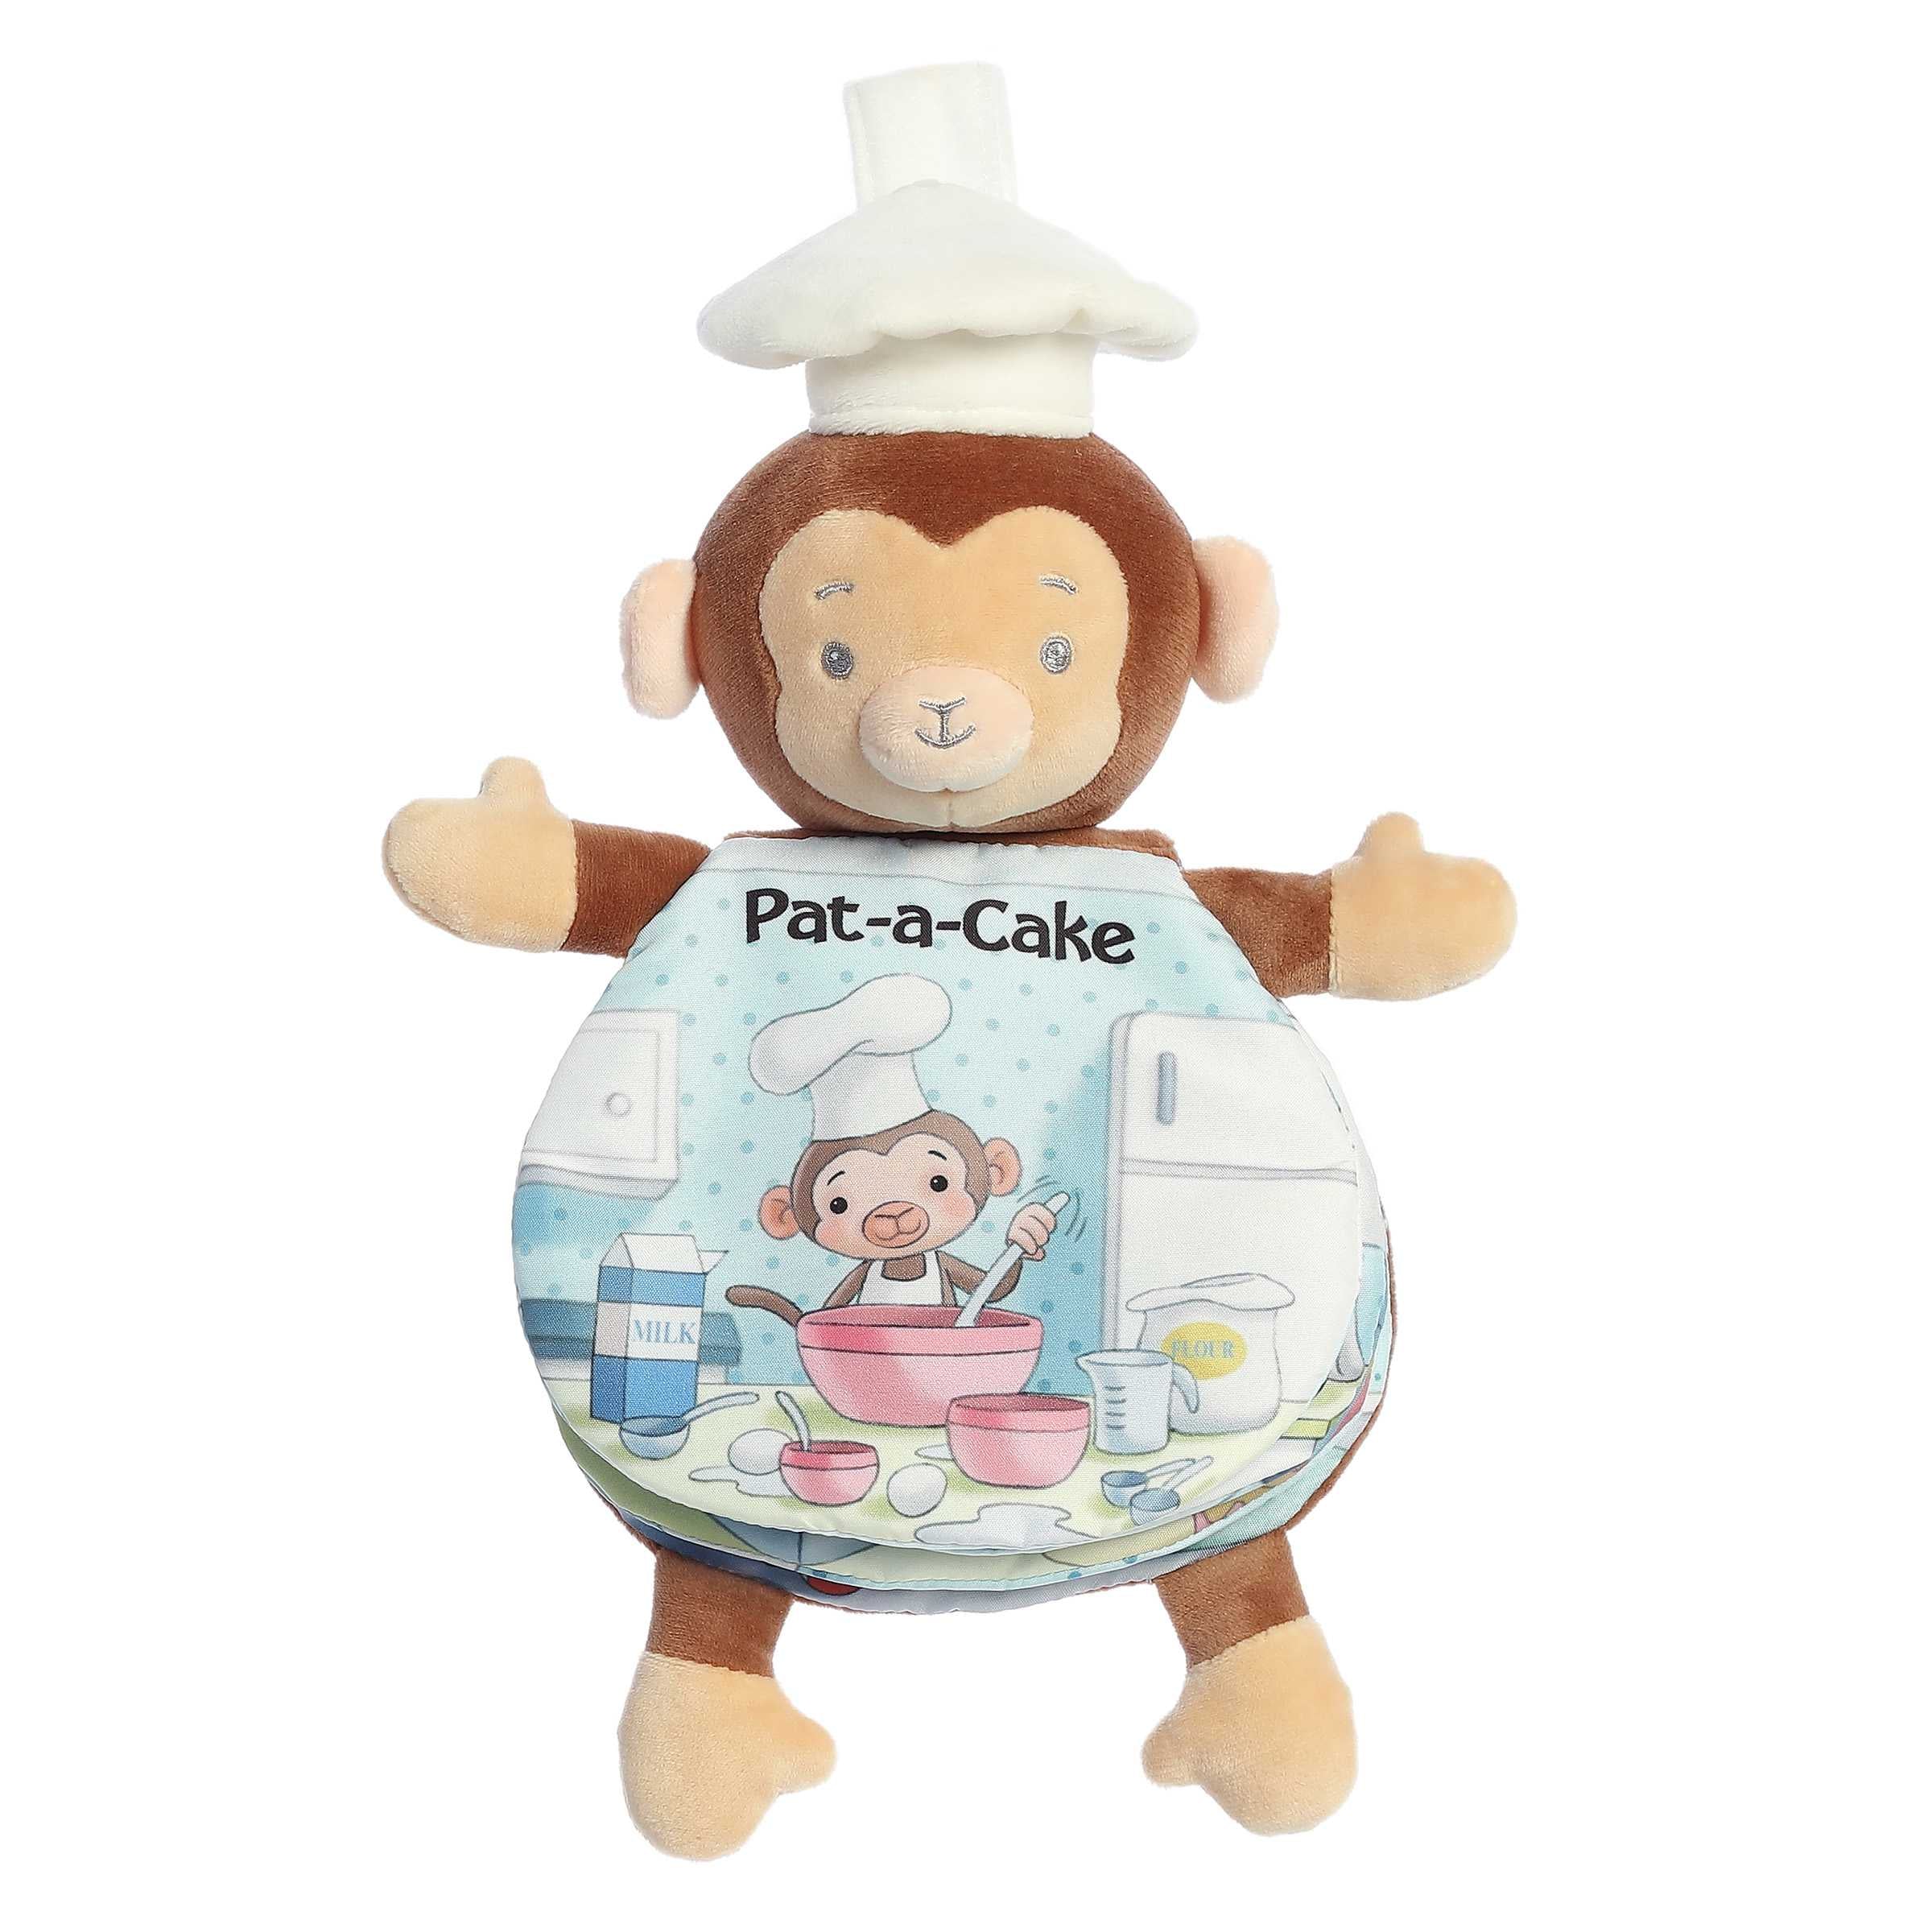 Playful Pat A Cake storybook with crinkly pages and pictures, and with a brown monkey stuffed animal wearing chef's hat